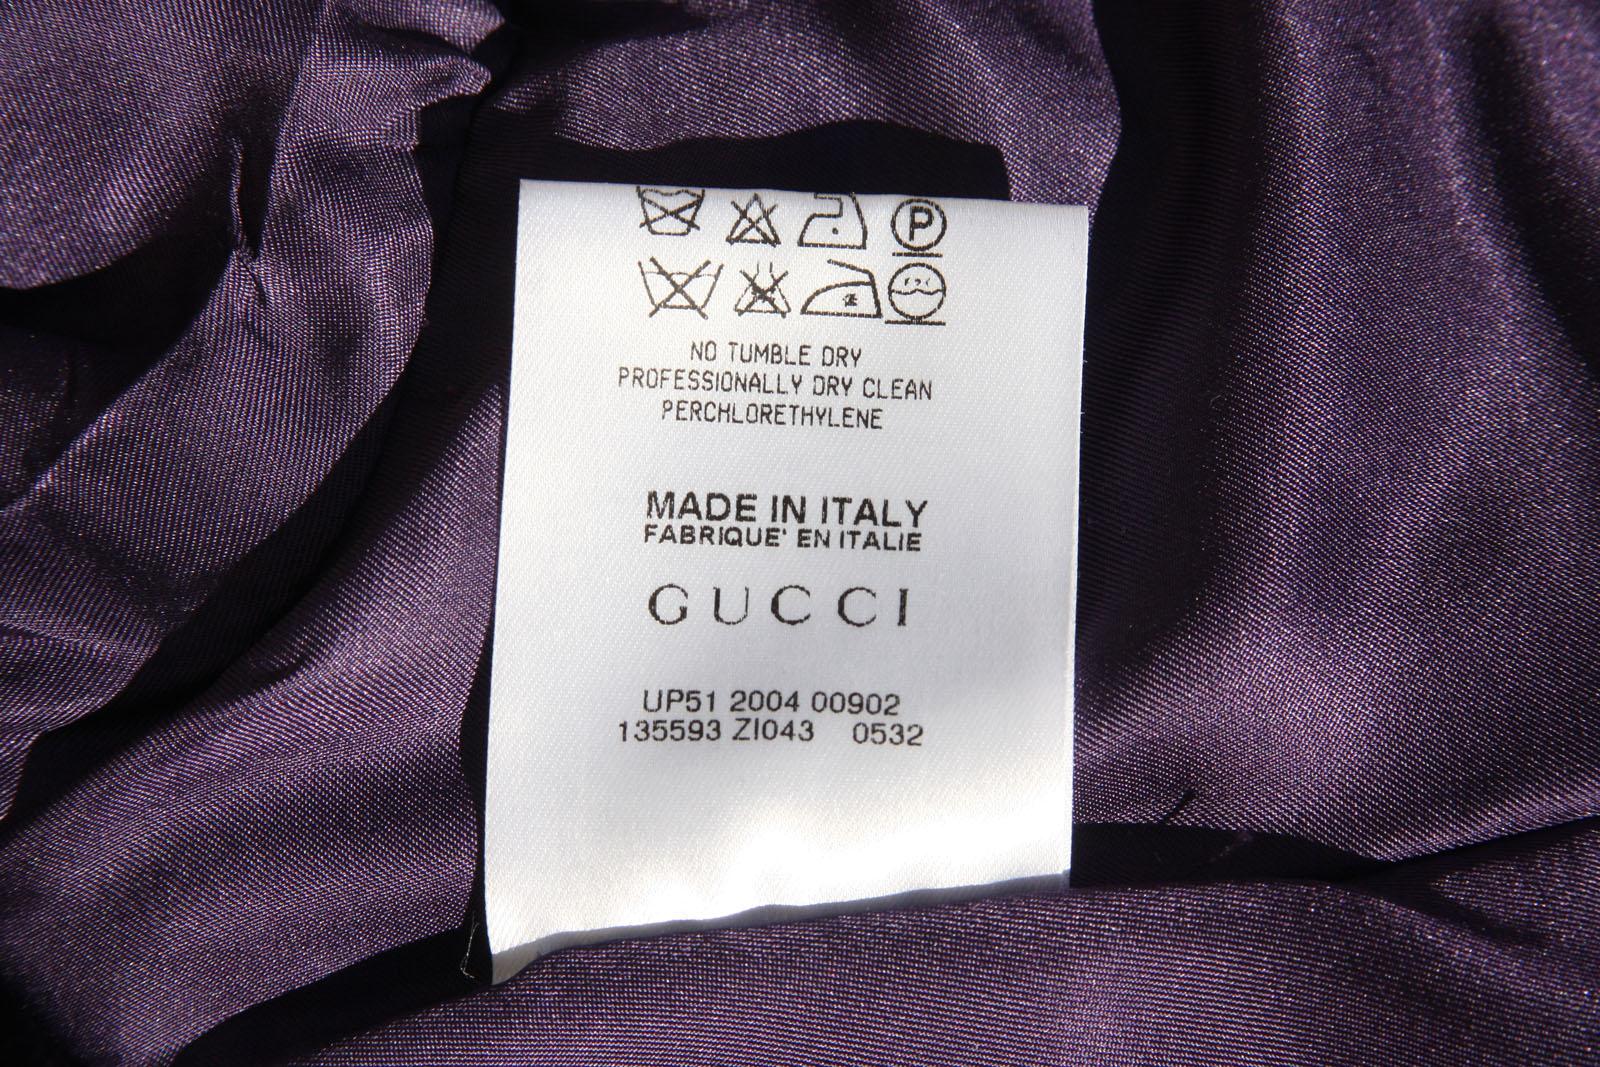 Tom Ford for Gucci F/W 2004 Runway Collection Purple Silk Taffeta Jacket 42 - 6 For Sale 3